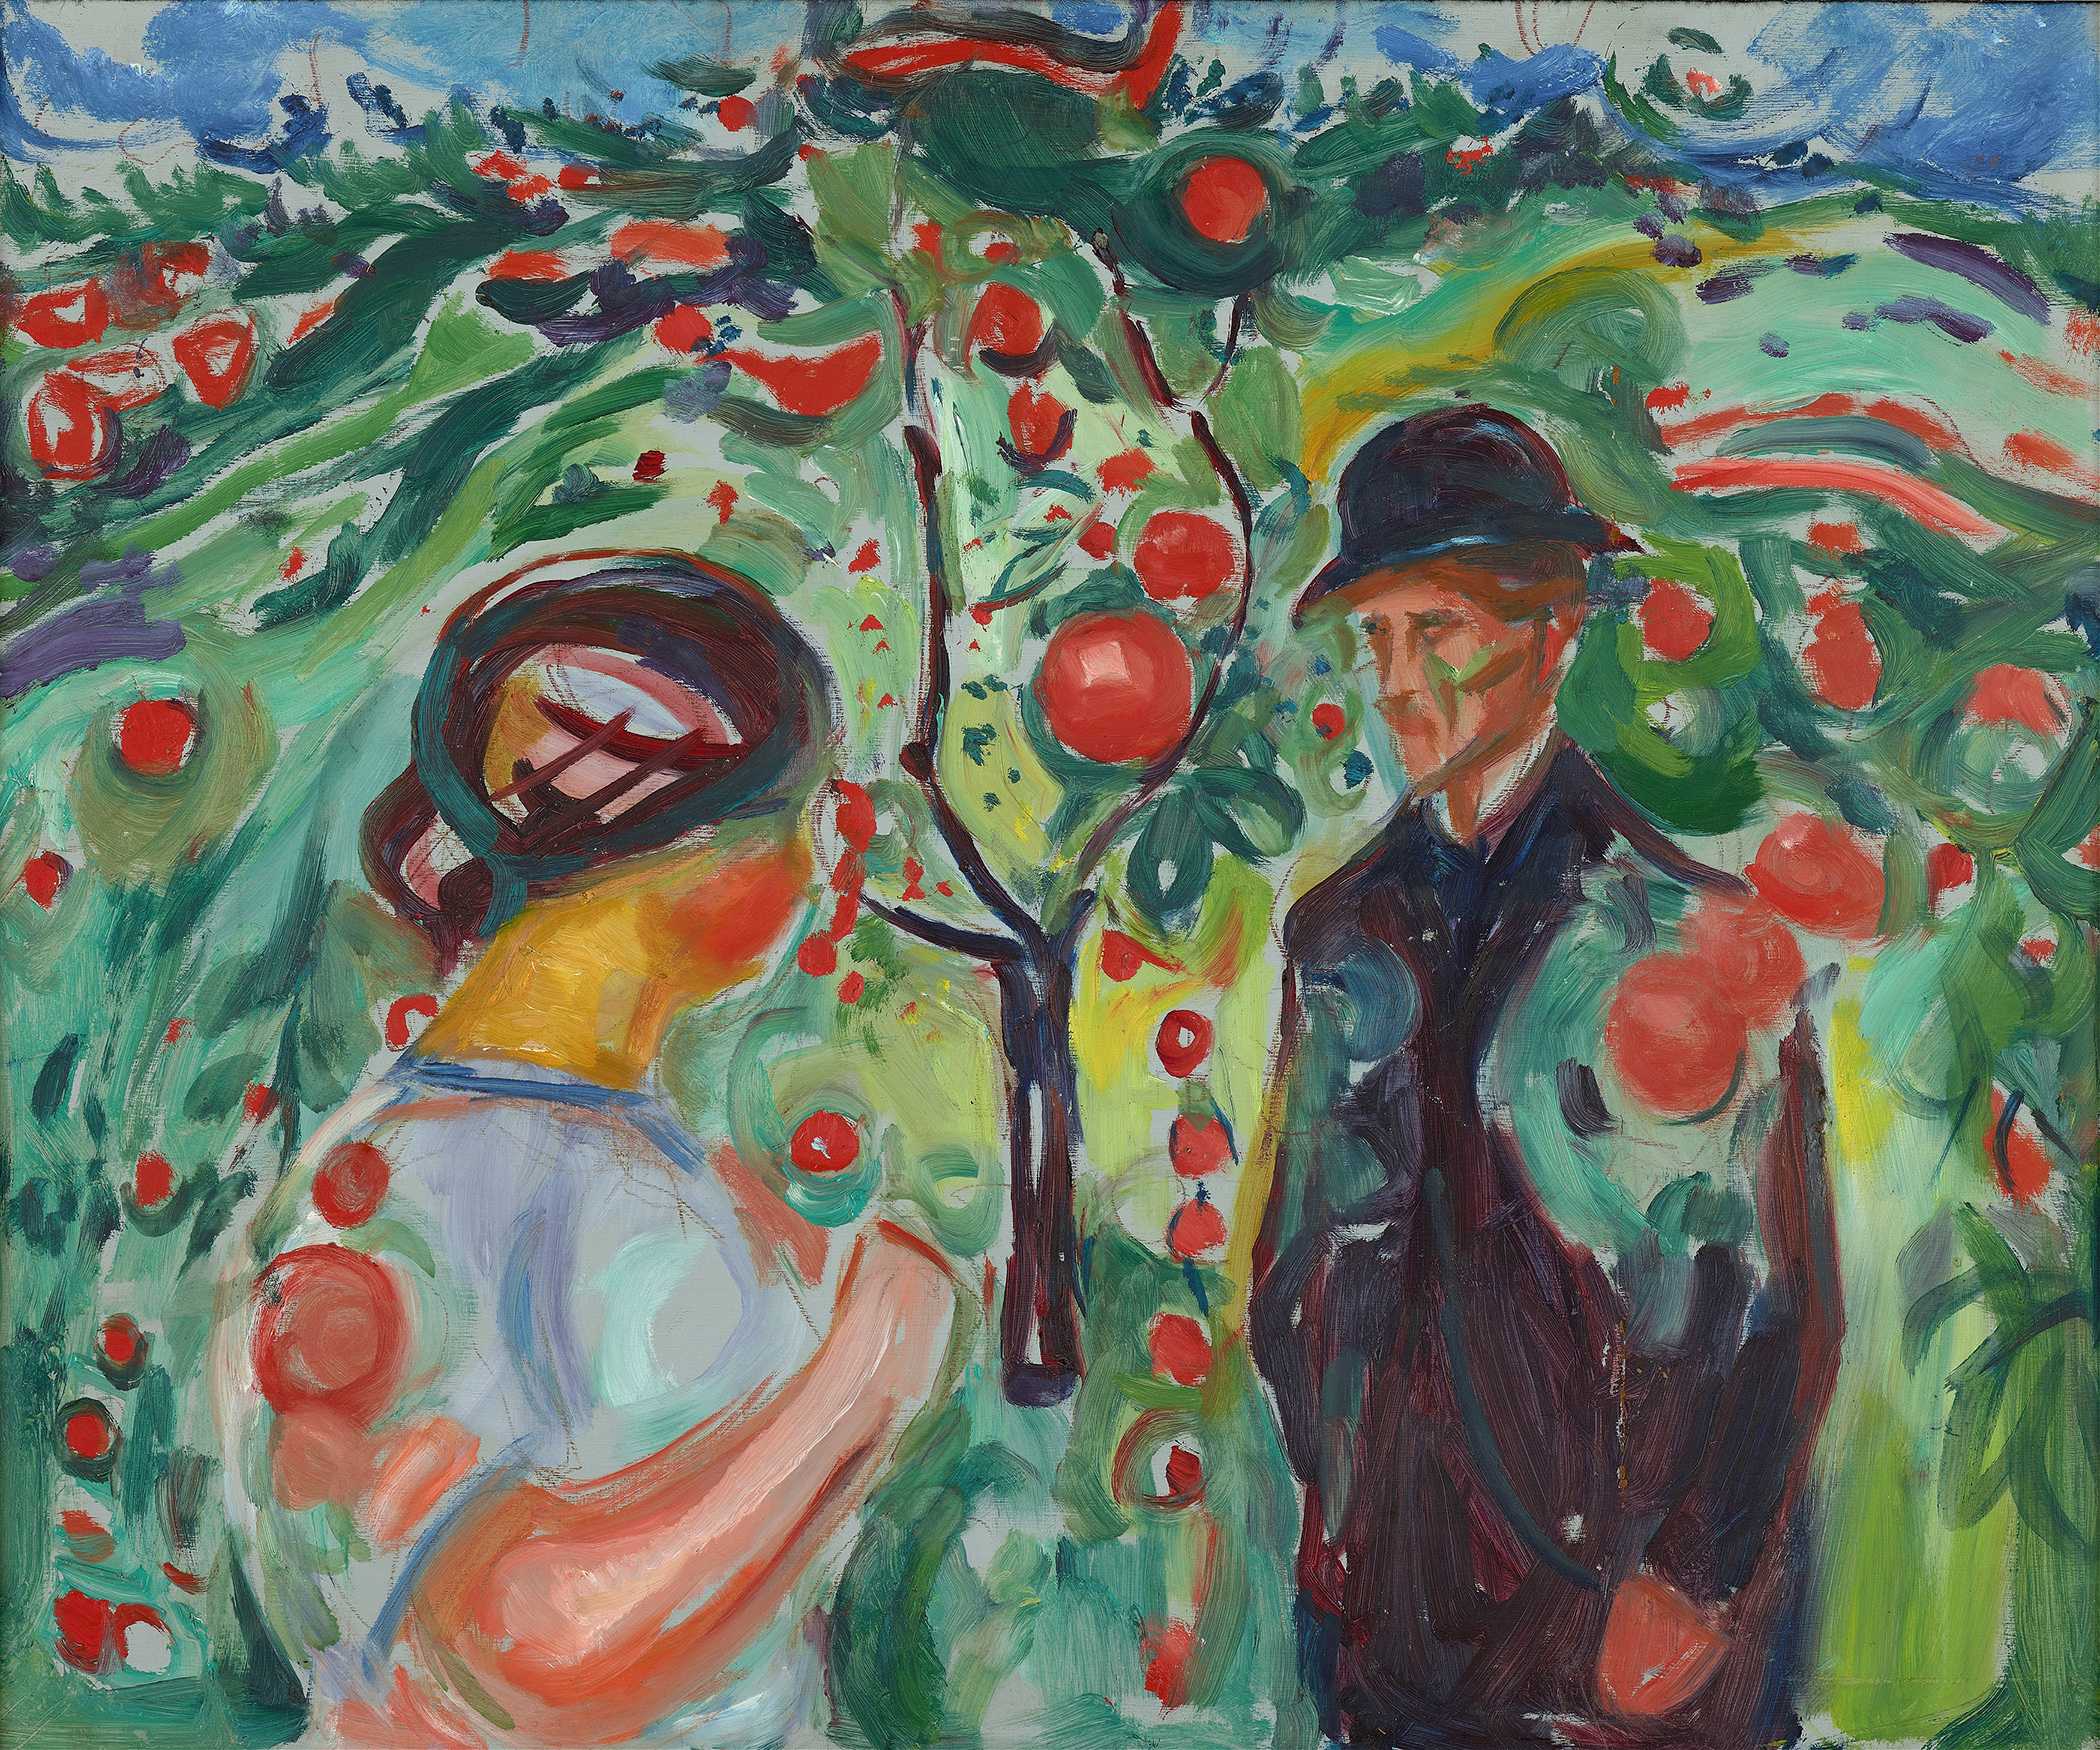 Find out more about Edvard Munch - Beneath the Red Apples